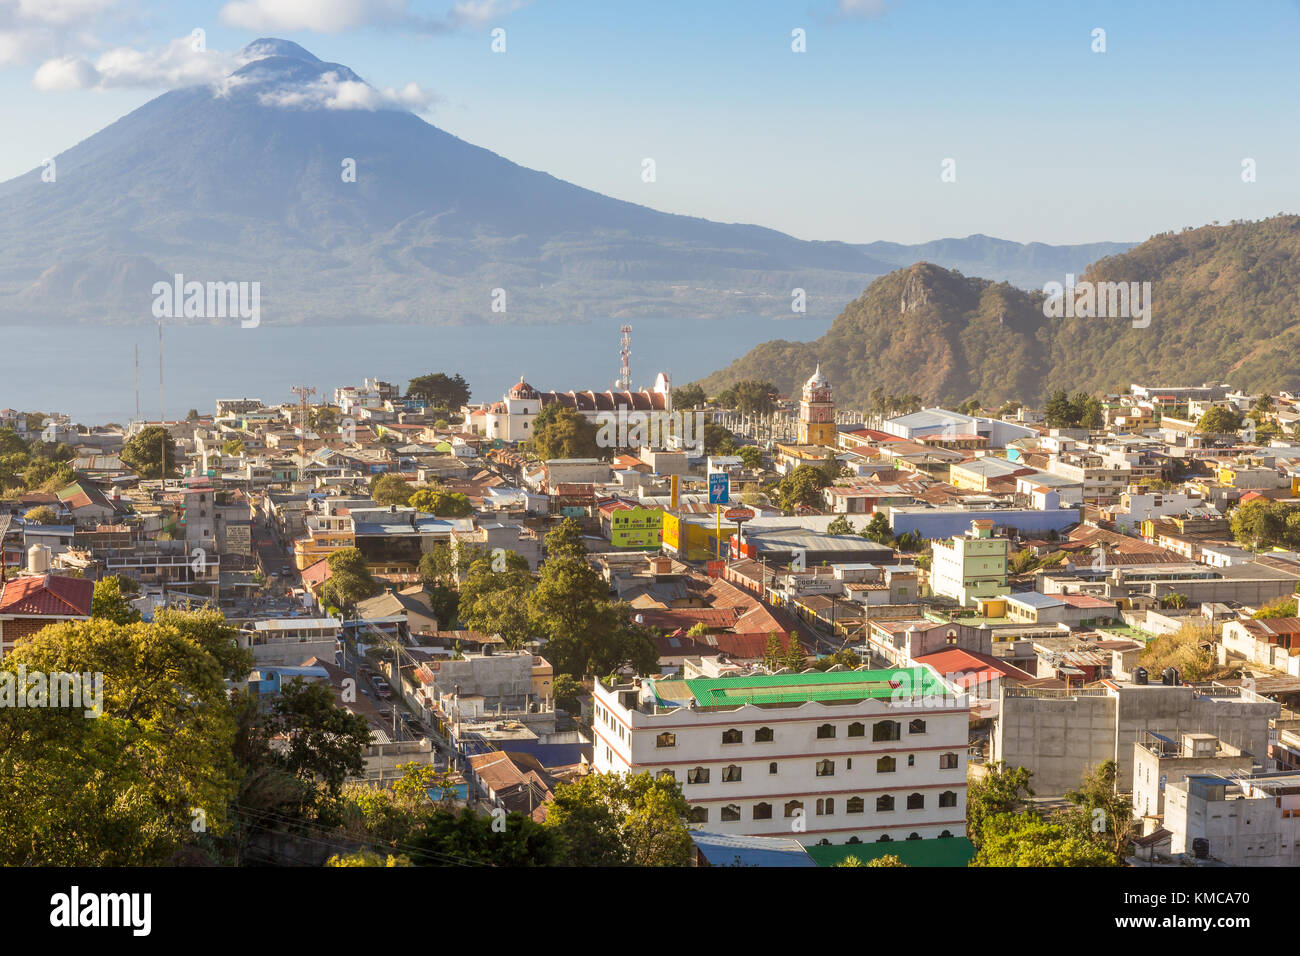 View from a lookout over the town Sololá, Lake Atitlán and the Atitlán volcano | Sololá | Guatemala Stock Photo